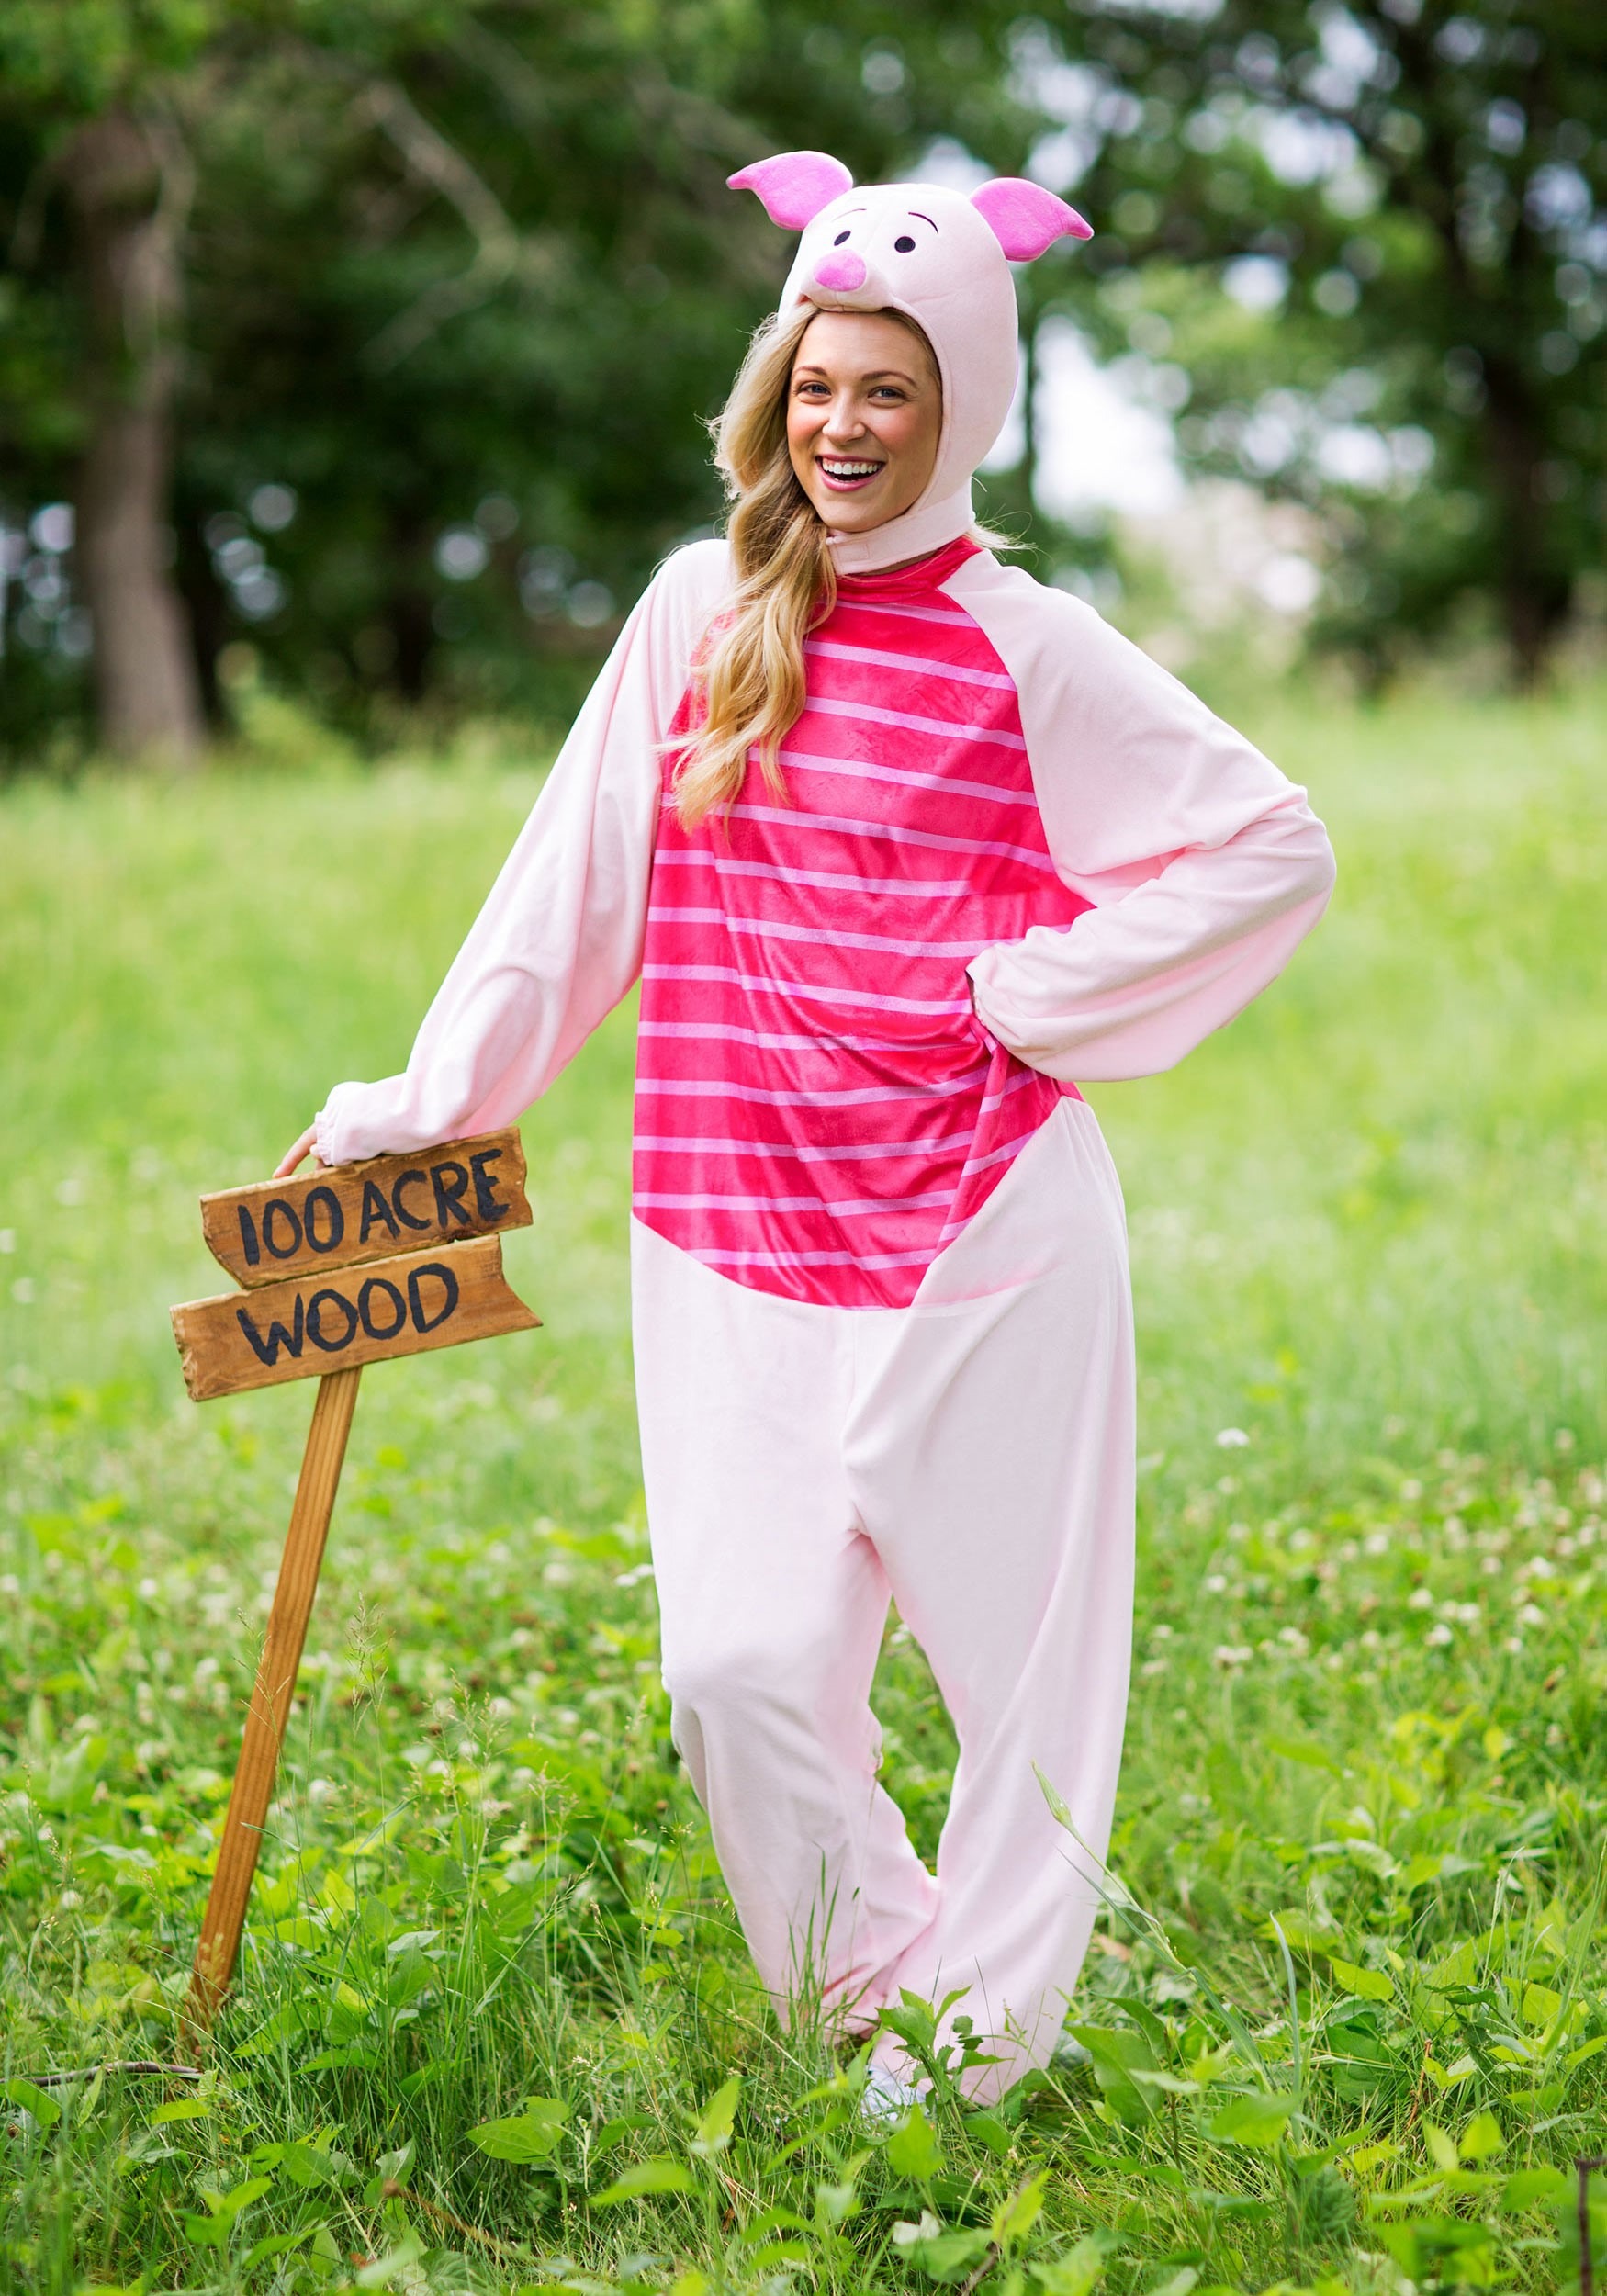 ☀ How to dress up as winnie the pooh for halloween